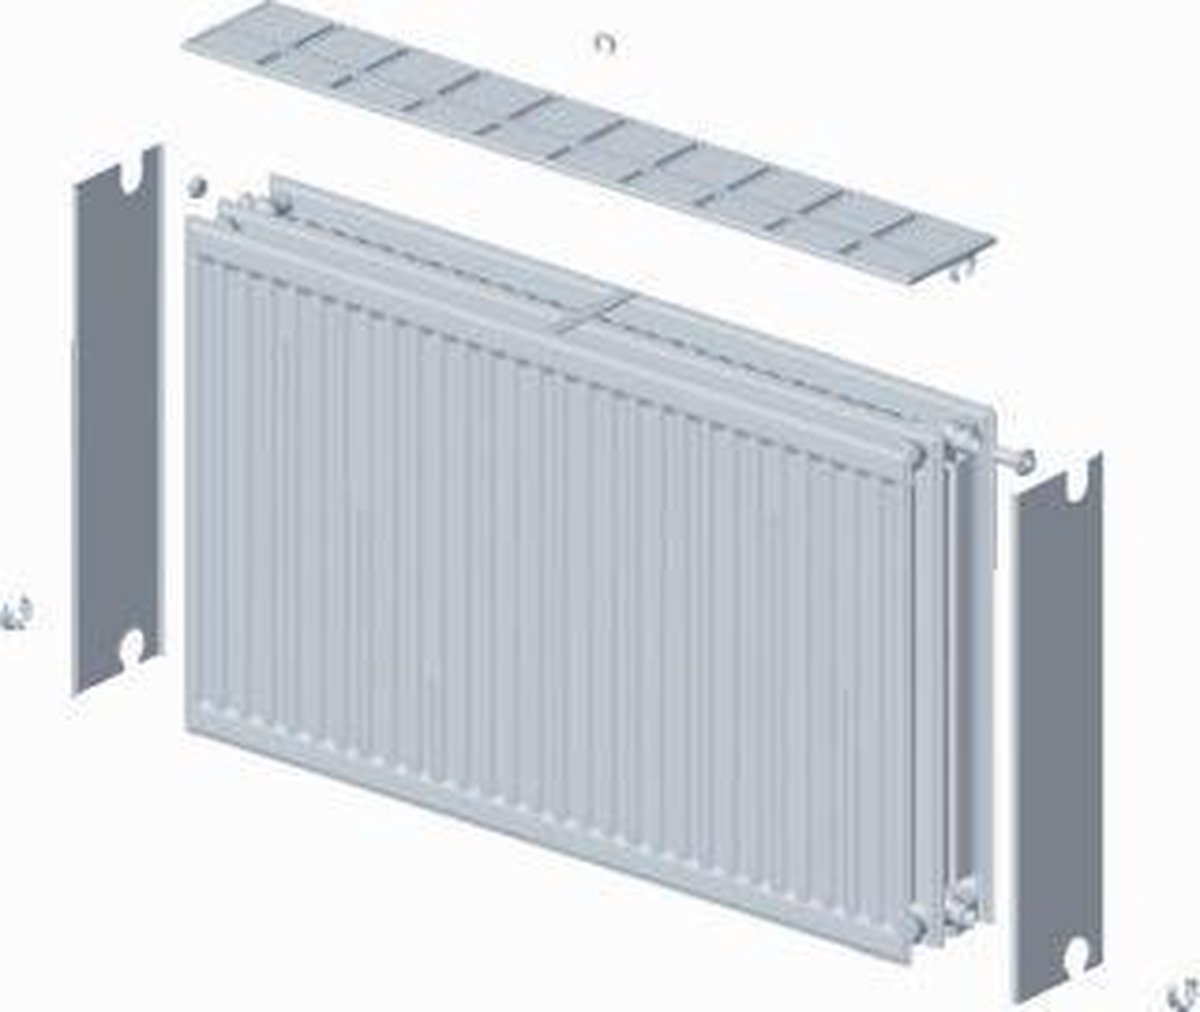 Stelrad paneelradiator Novello, staal, wit, (hxlxd) 400x1600x158mm, 33